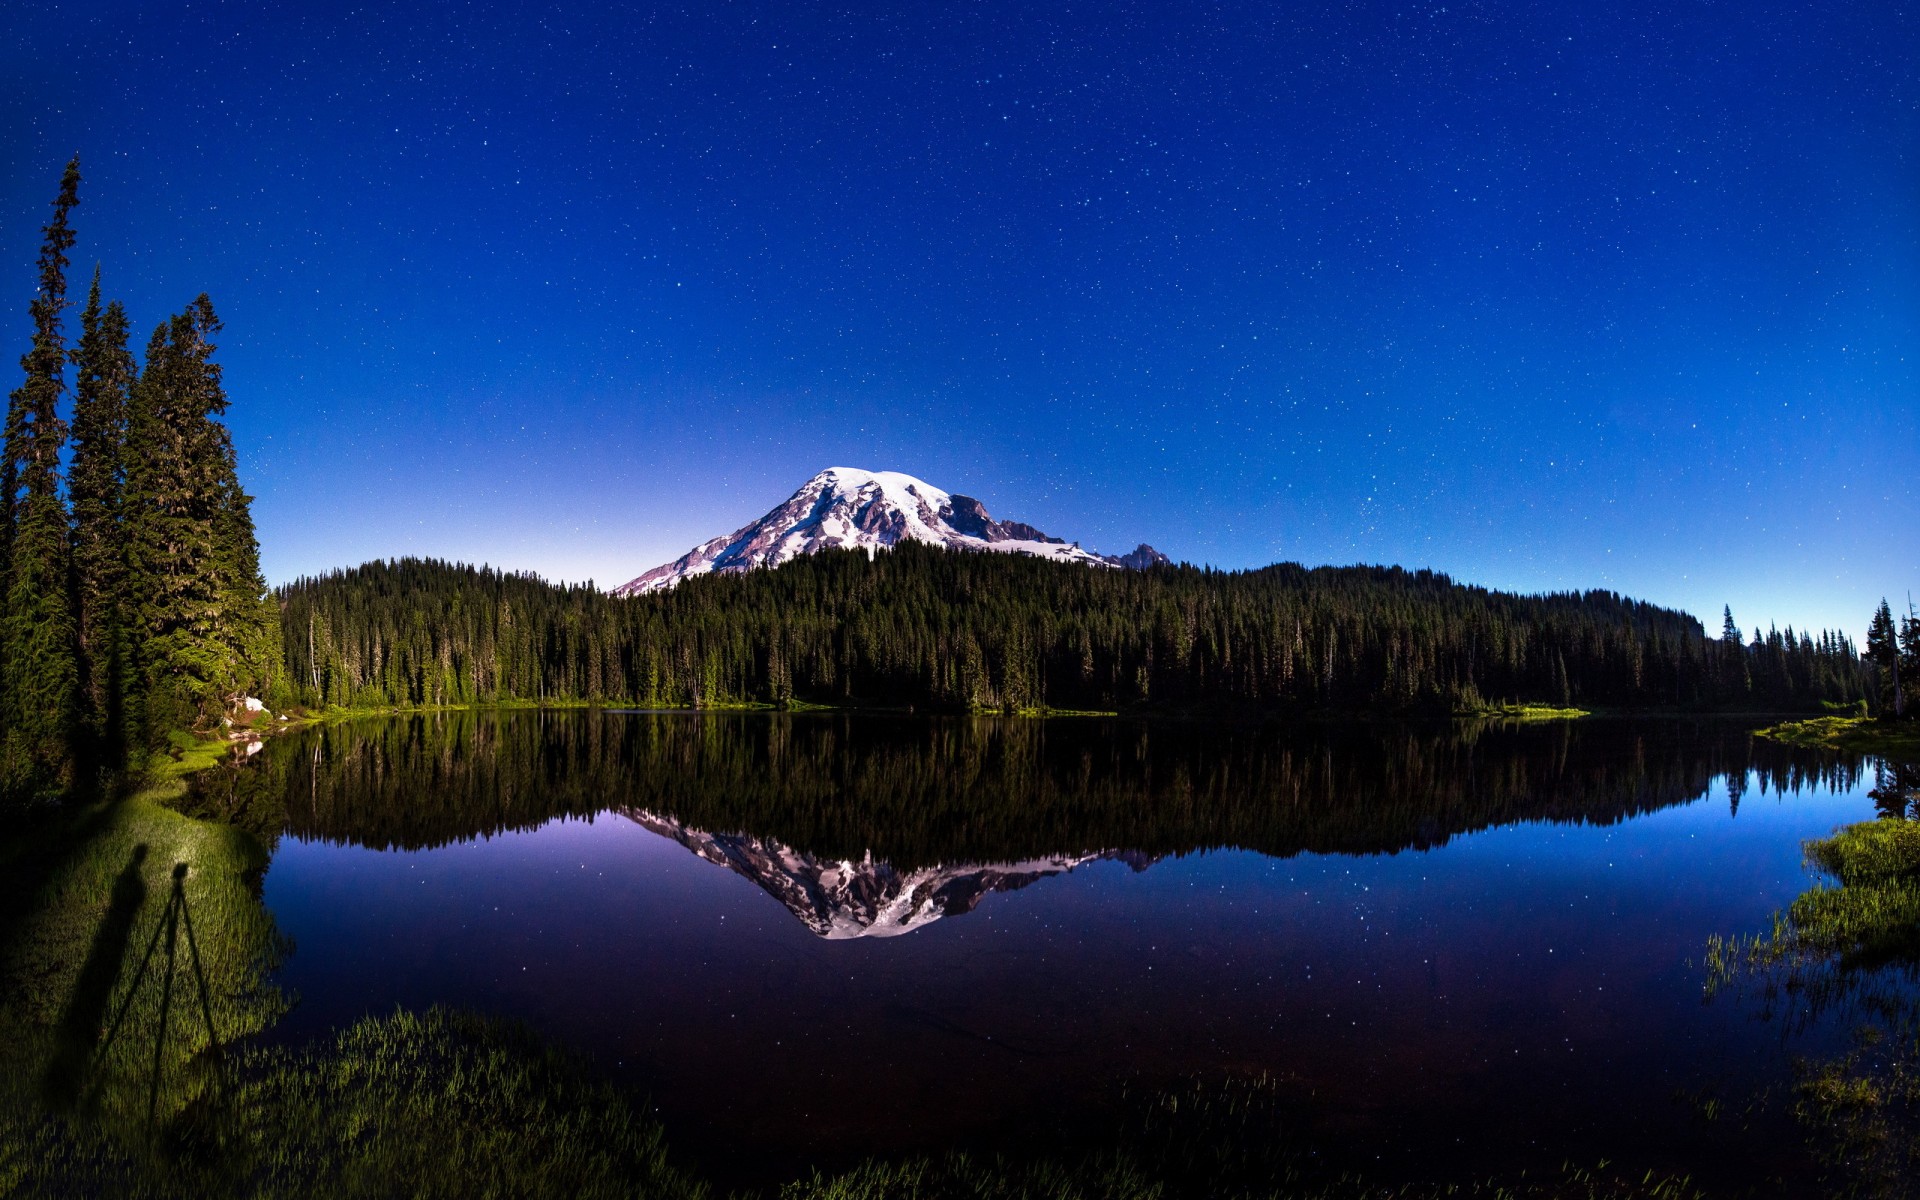 Lake Mountain Summer Nature Landscape Reflection Trees Forest Stars